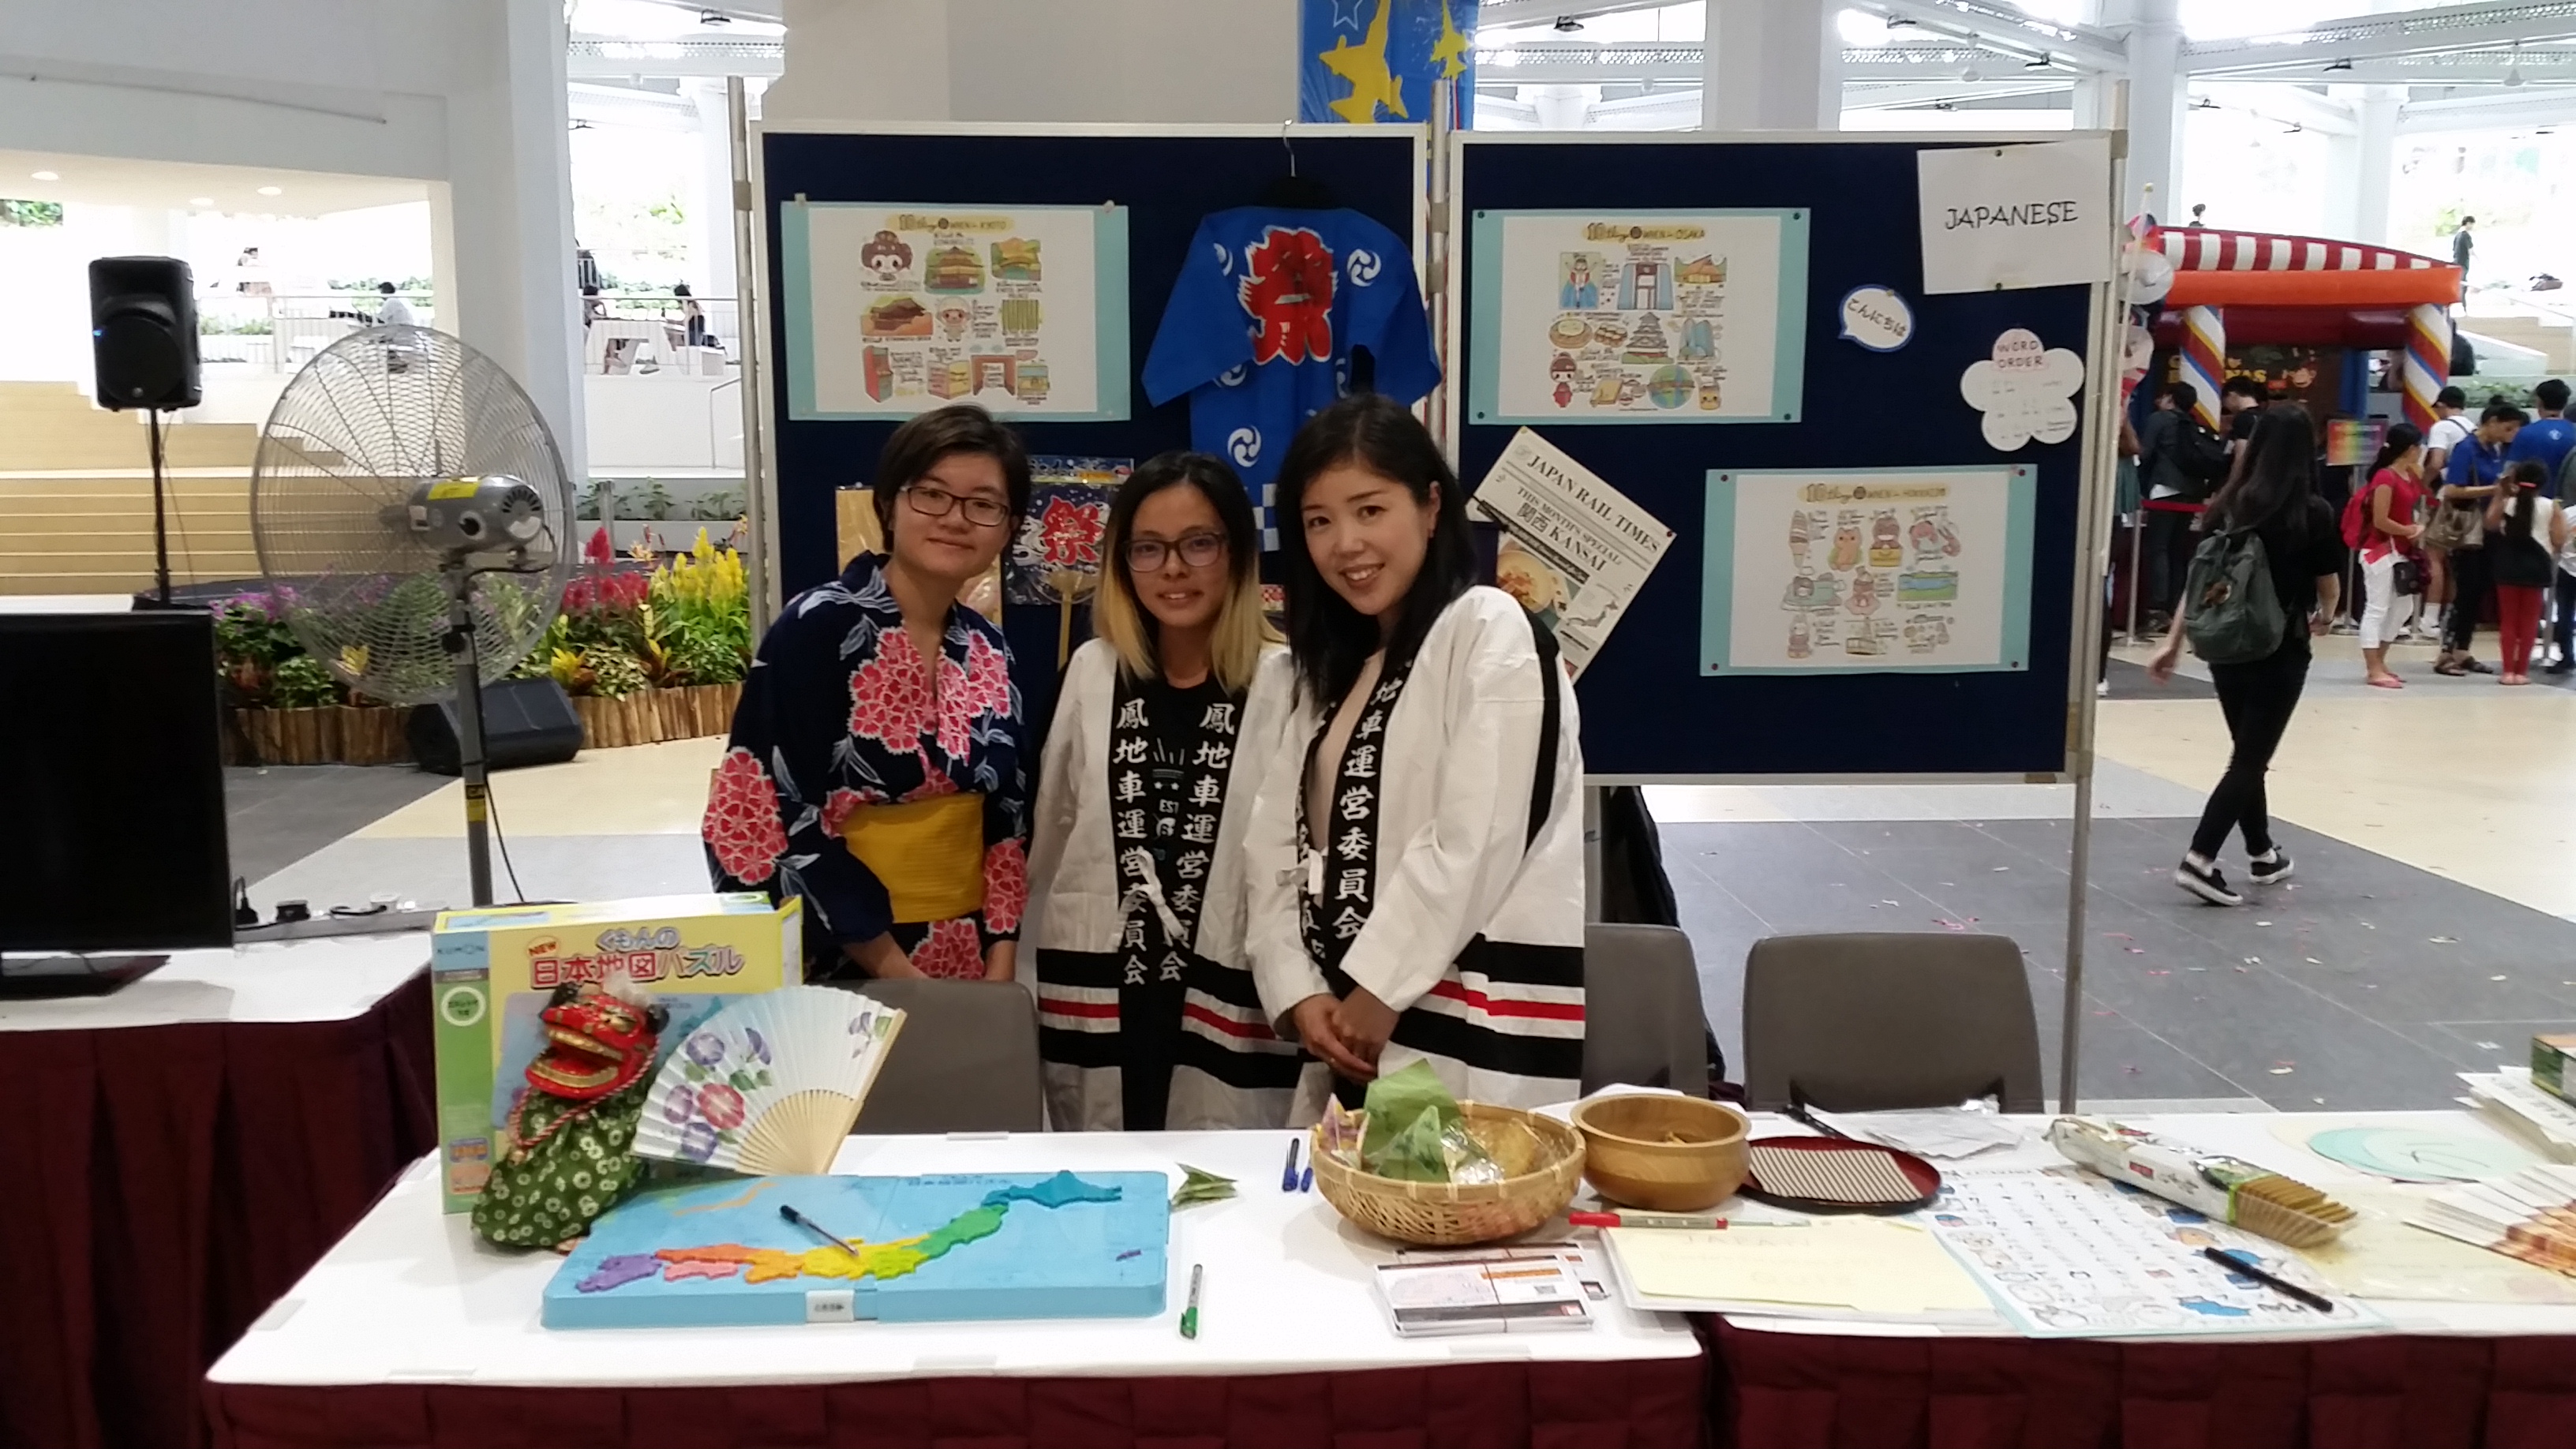 Foreign Languages Carnival (Japanese)